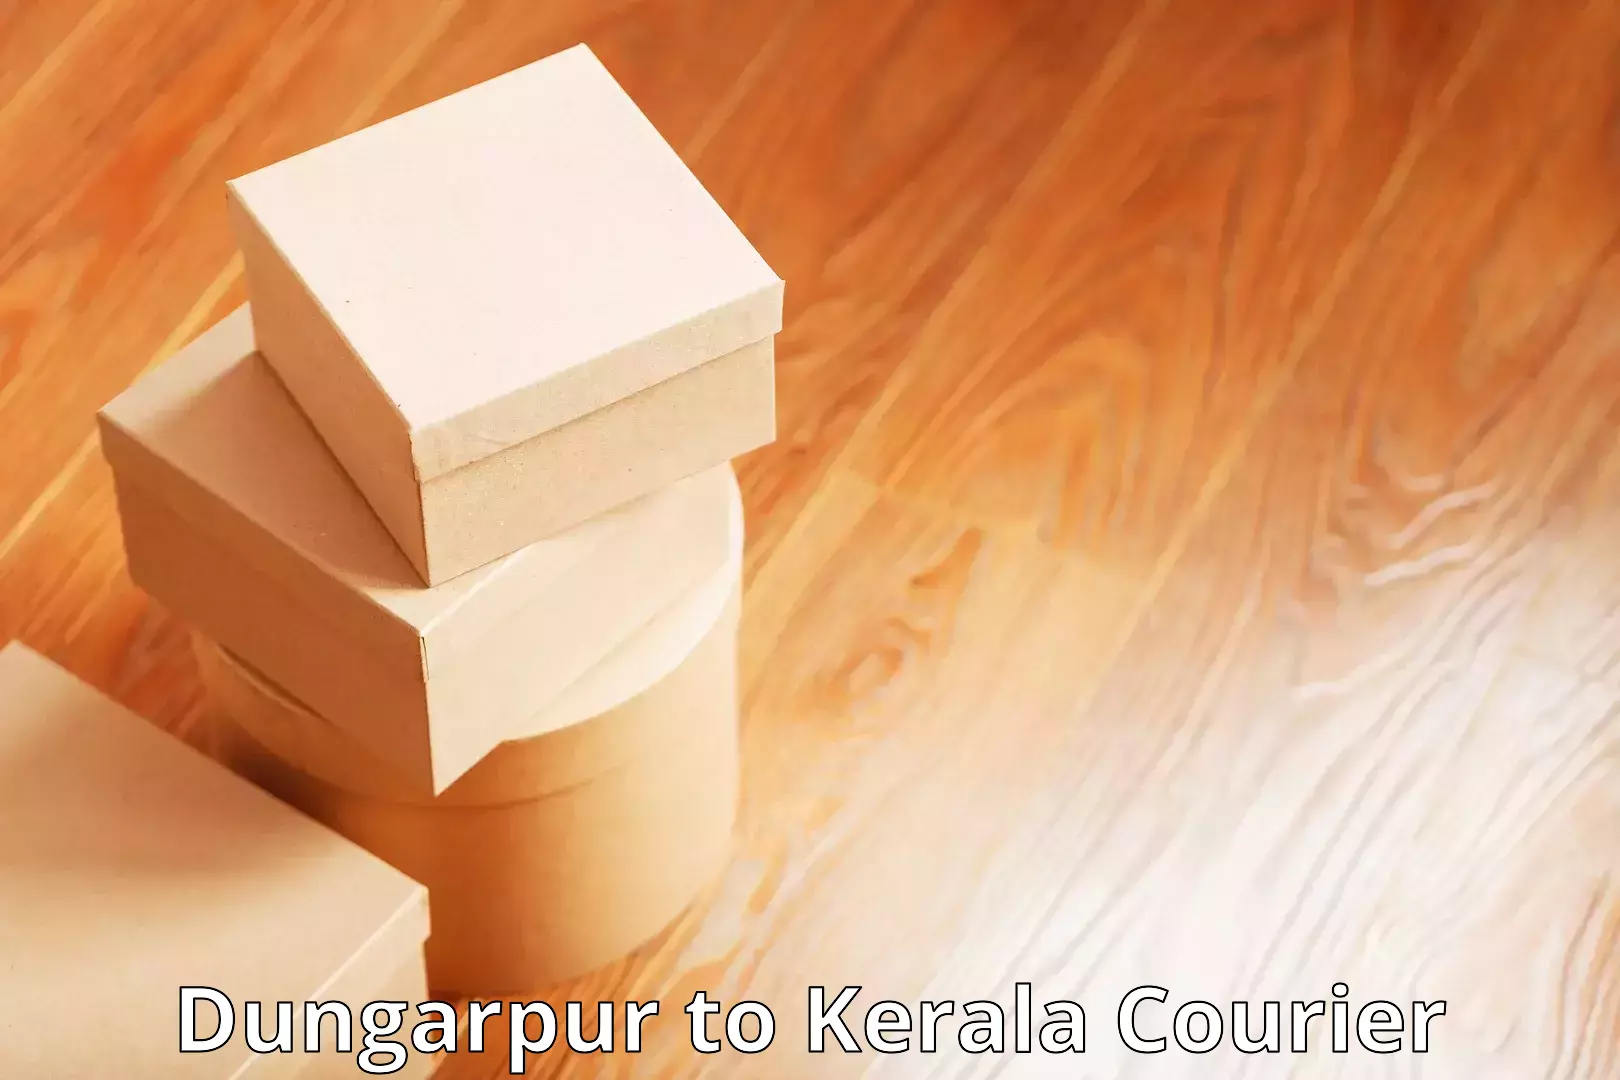 Nationwide shipping services Dungarpur to Kerala